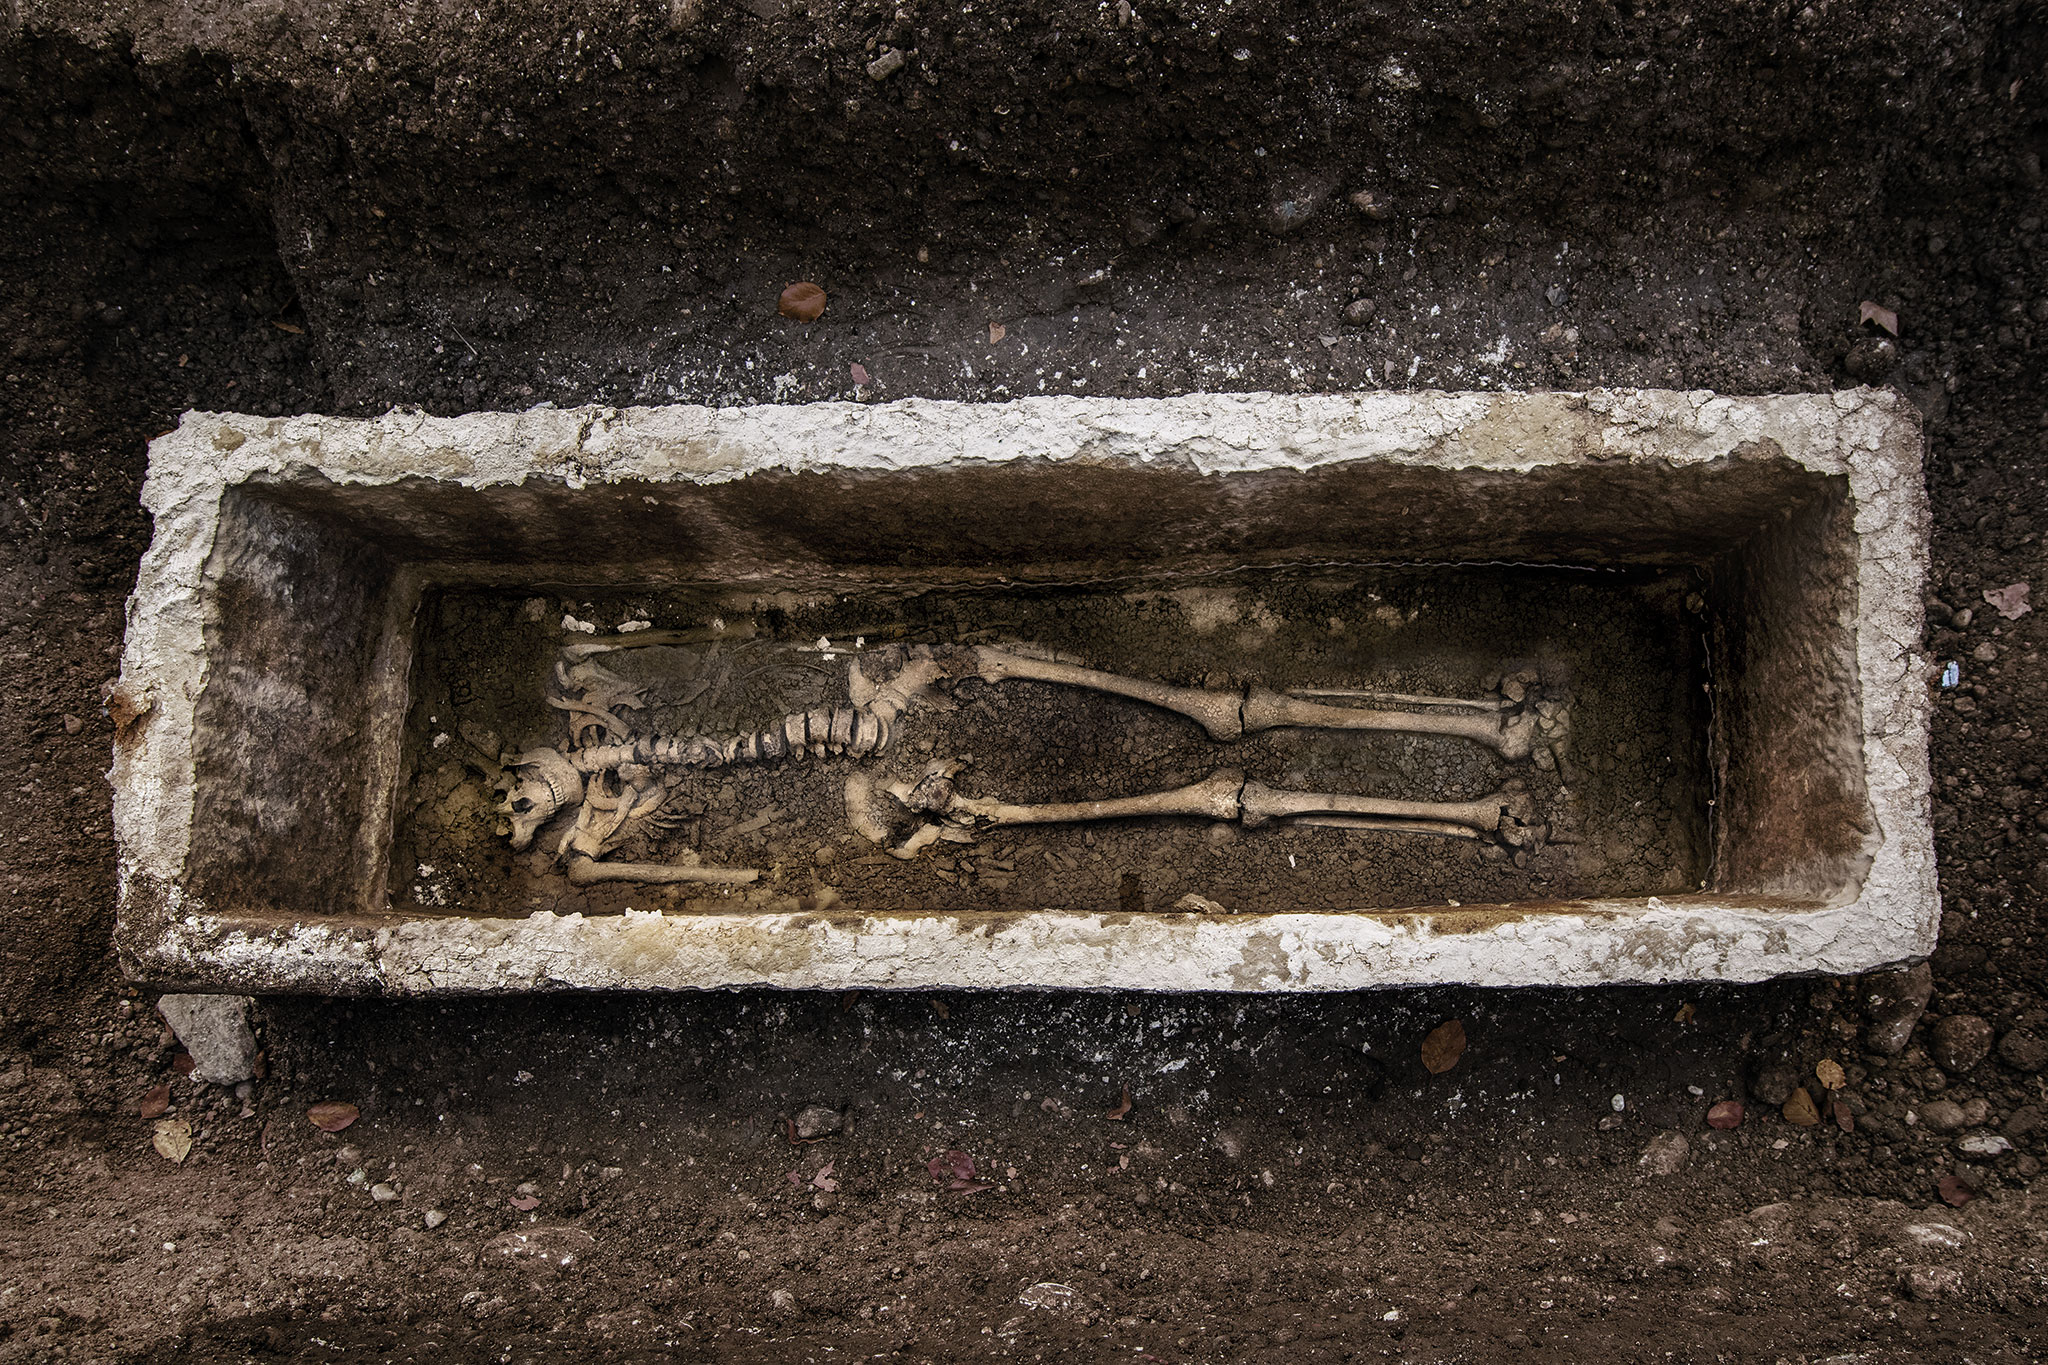  An Ancient Roman stone sarcophagus containing the skeletal remains of a man and a horse.